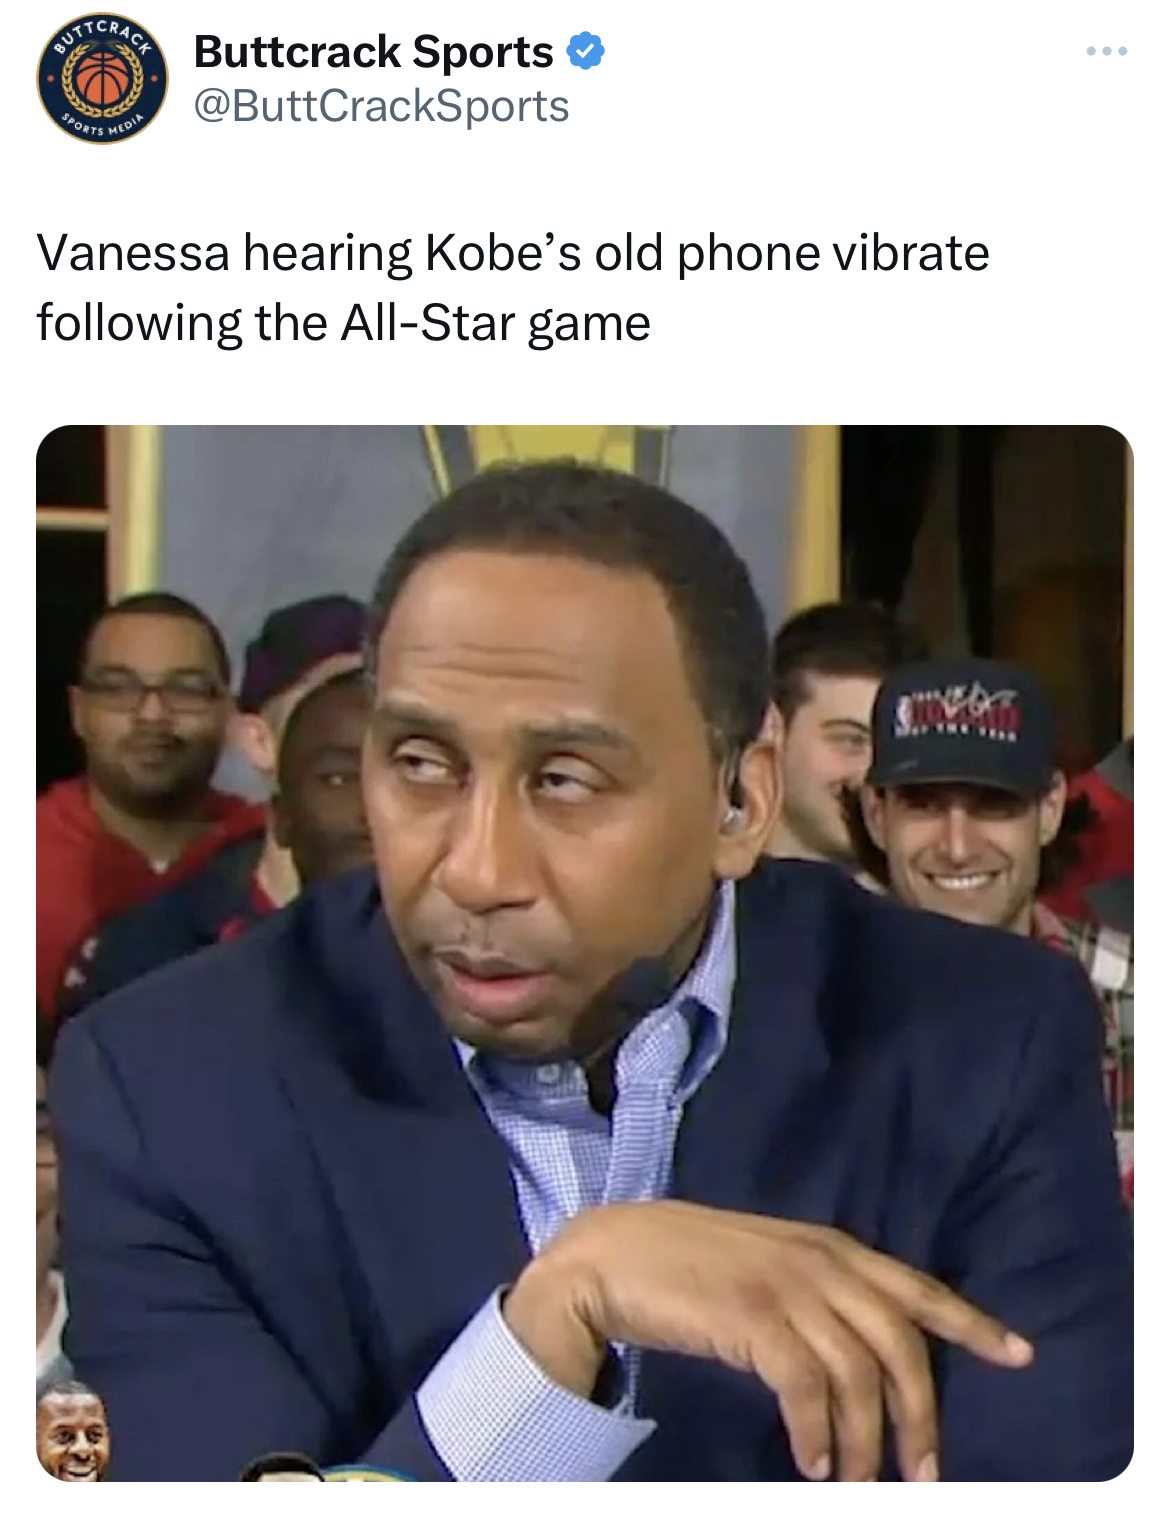 Unhinged Tweets - stephen a smith eyes - Buttcrack Sports Vanessa hearing Kobe's old phone vibrate ing the AllStar game